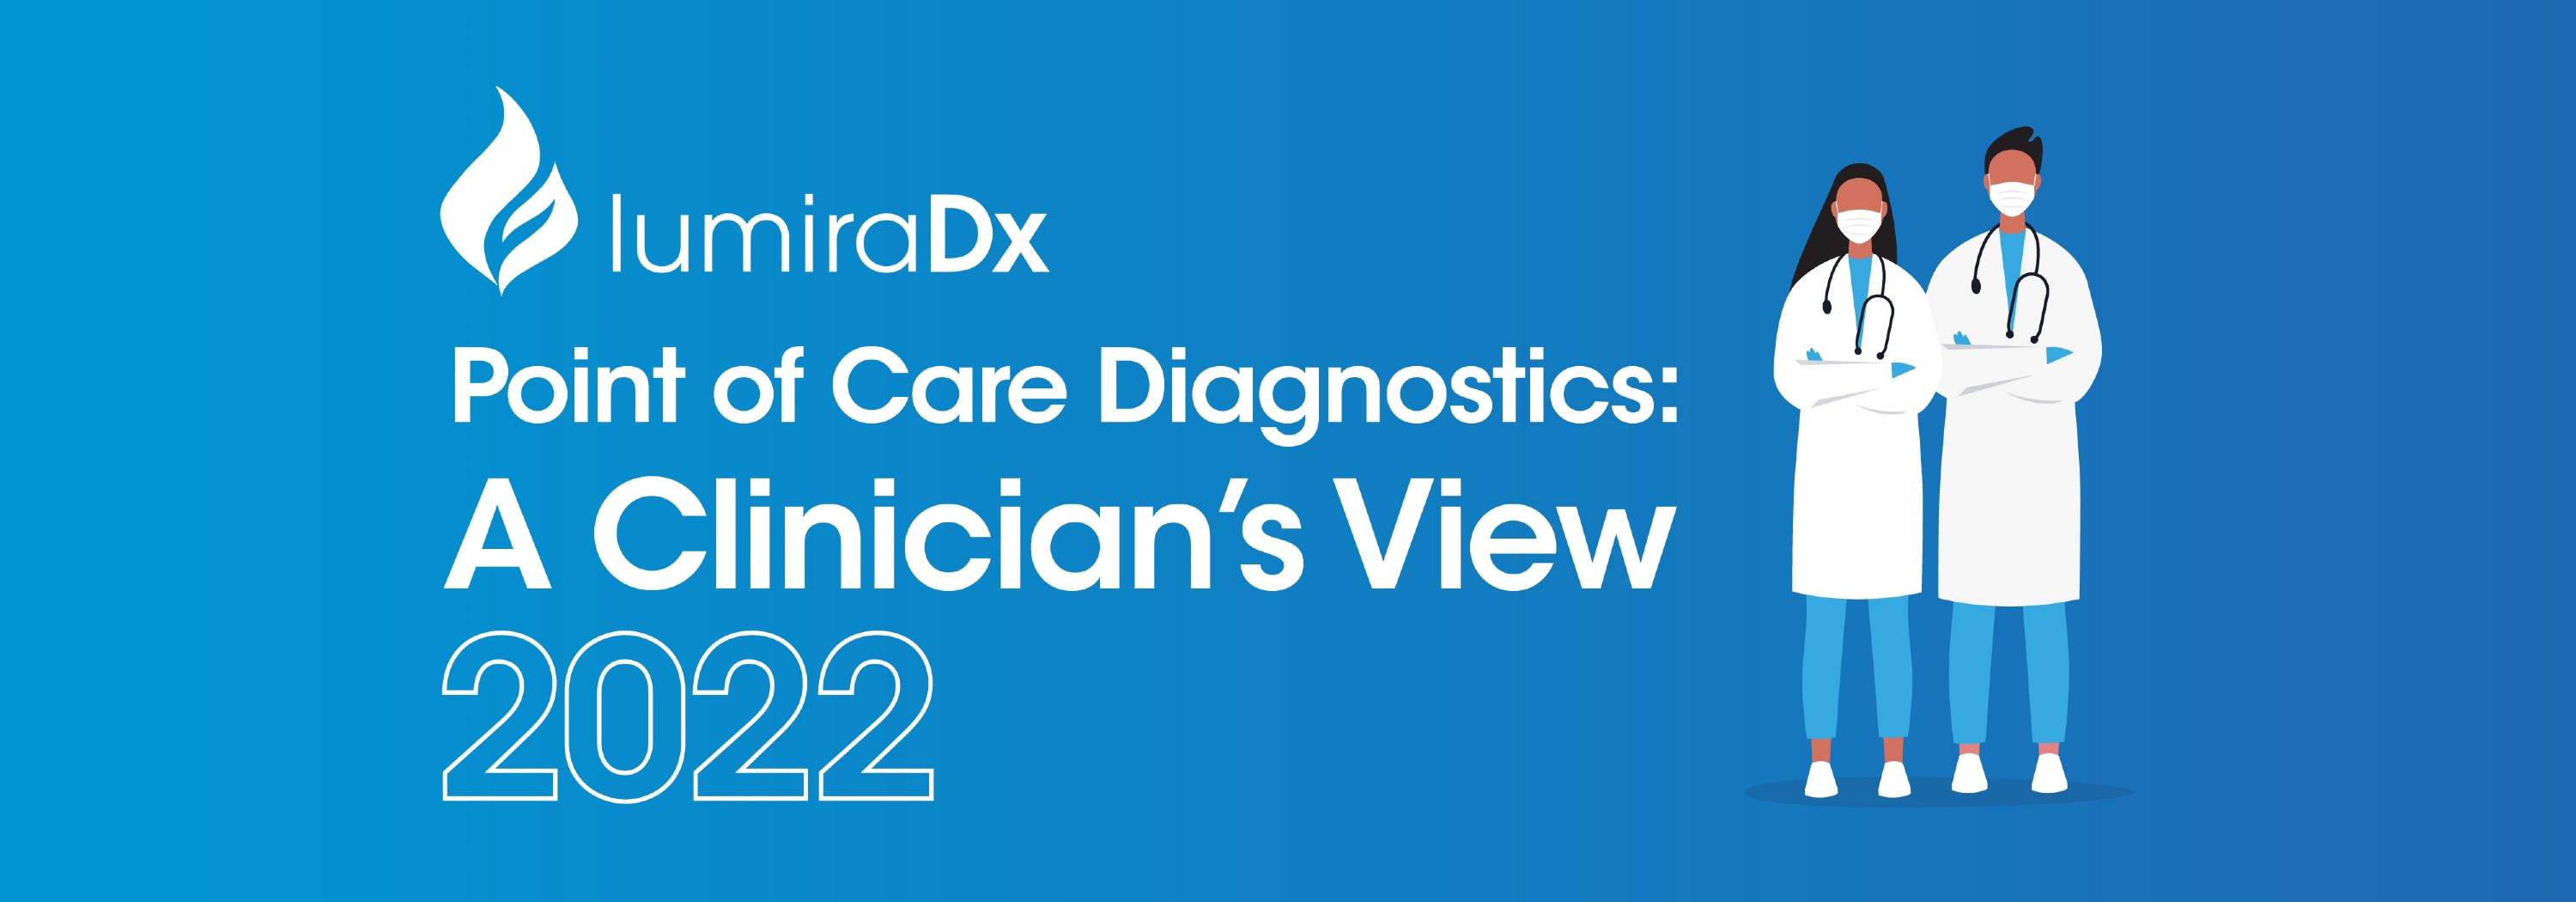 A Clinician's View 2022 